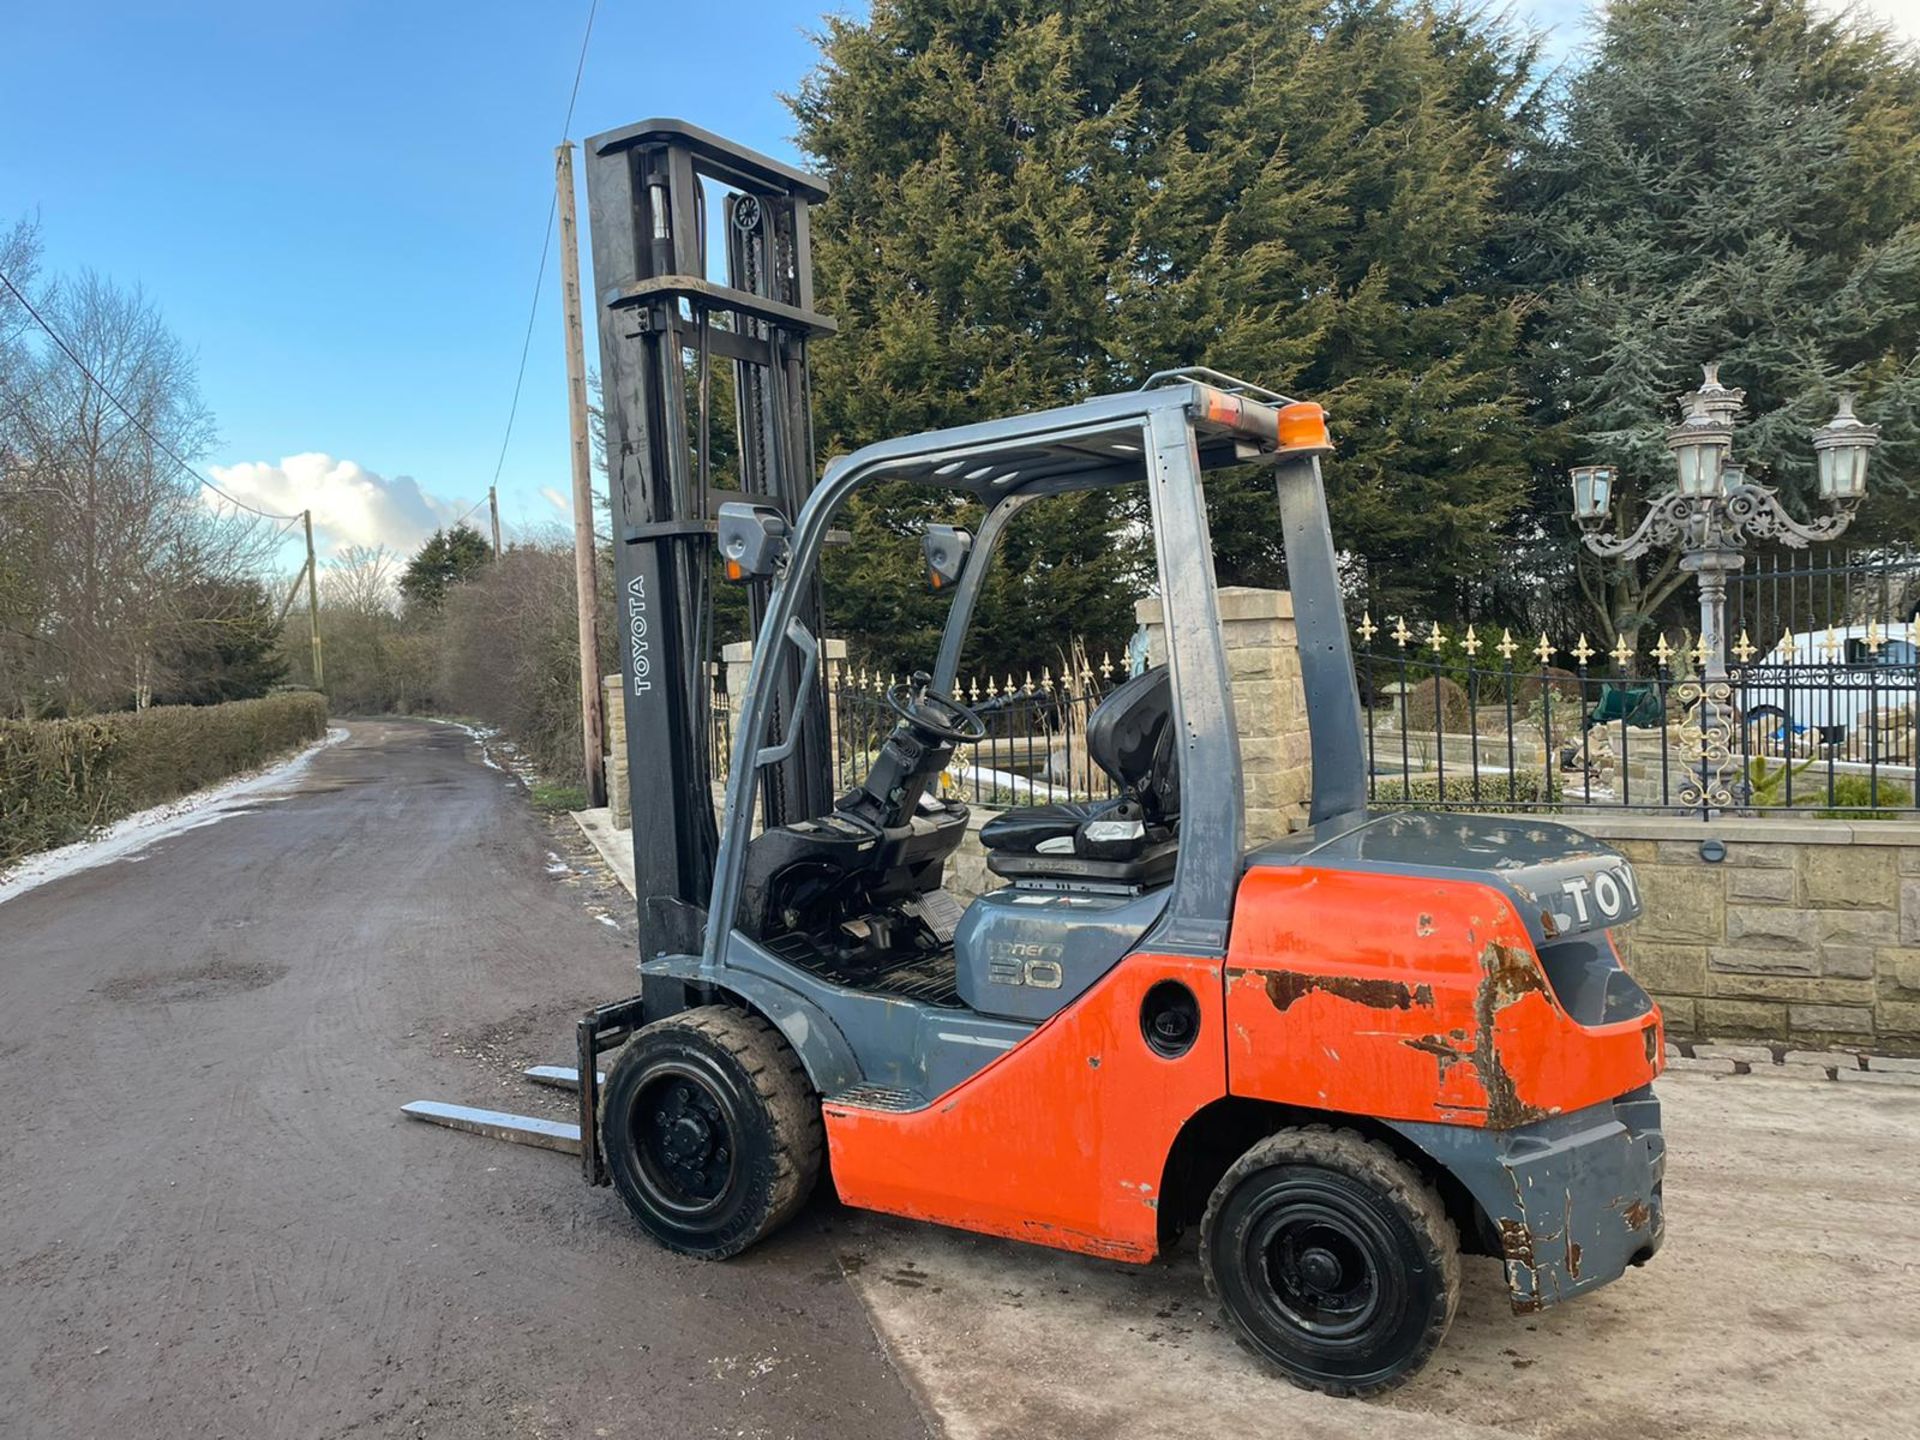 2013 TOYOTA TONERO 30 FORKLIFT, RUNS, DRIVES AND LIFTS, LOW 4720 HOURS, CLEAN MACHINE *PLUS VAT* - Image 3 of 9